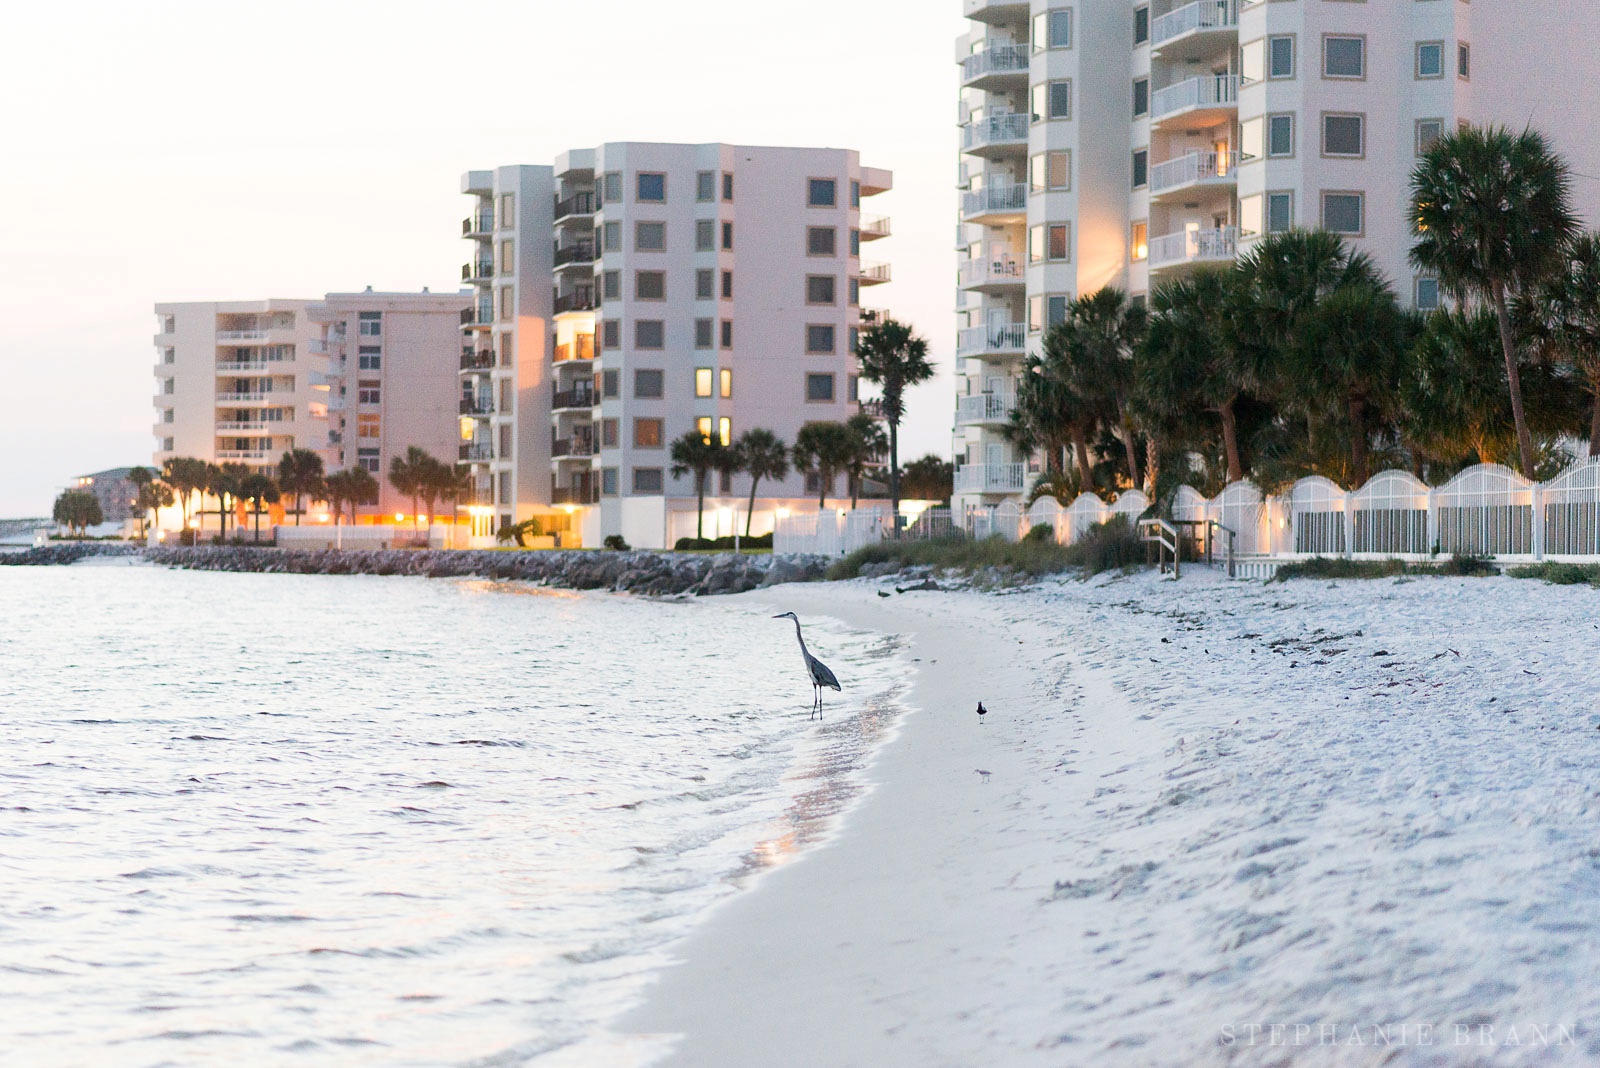 crane-by-the-beach-at-sunset-at-the-jetties-in-destin-florida